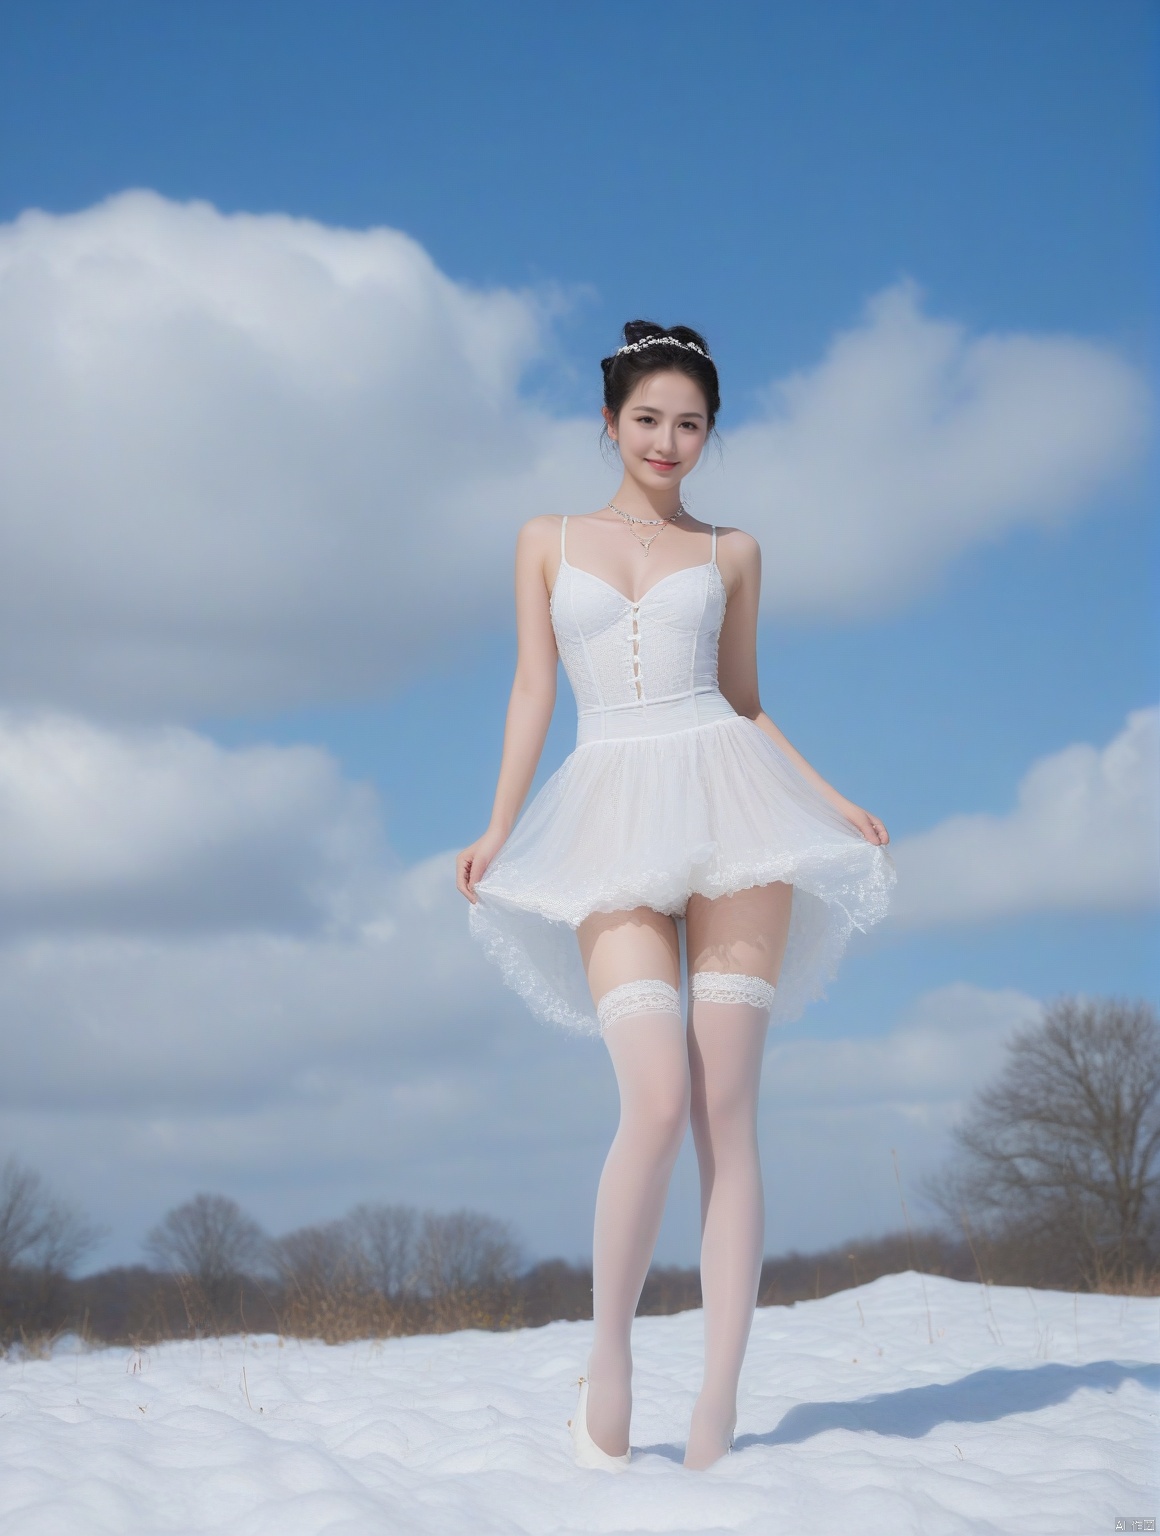  (((nsfw))), Realistic, masterpiece, highest quality, high resolution, extreme details, 1 girl, solo, bun, headdress, delicate eyes, beautiful face, shallow smile, delicate necklace, suspender dress, white lace dress, light gauze, snow-white skin, delicate skin texture, silver bracelet, pantyhose, high heels, elegant standing, outdoor, blue sky, white clouds, flowers, flowers, grass, movie light, light, light tracking, (Nikon AF-S 105mm f / 1.4E ED), MAJICMIX STYLE